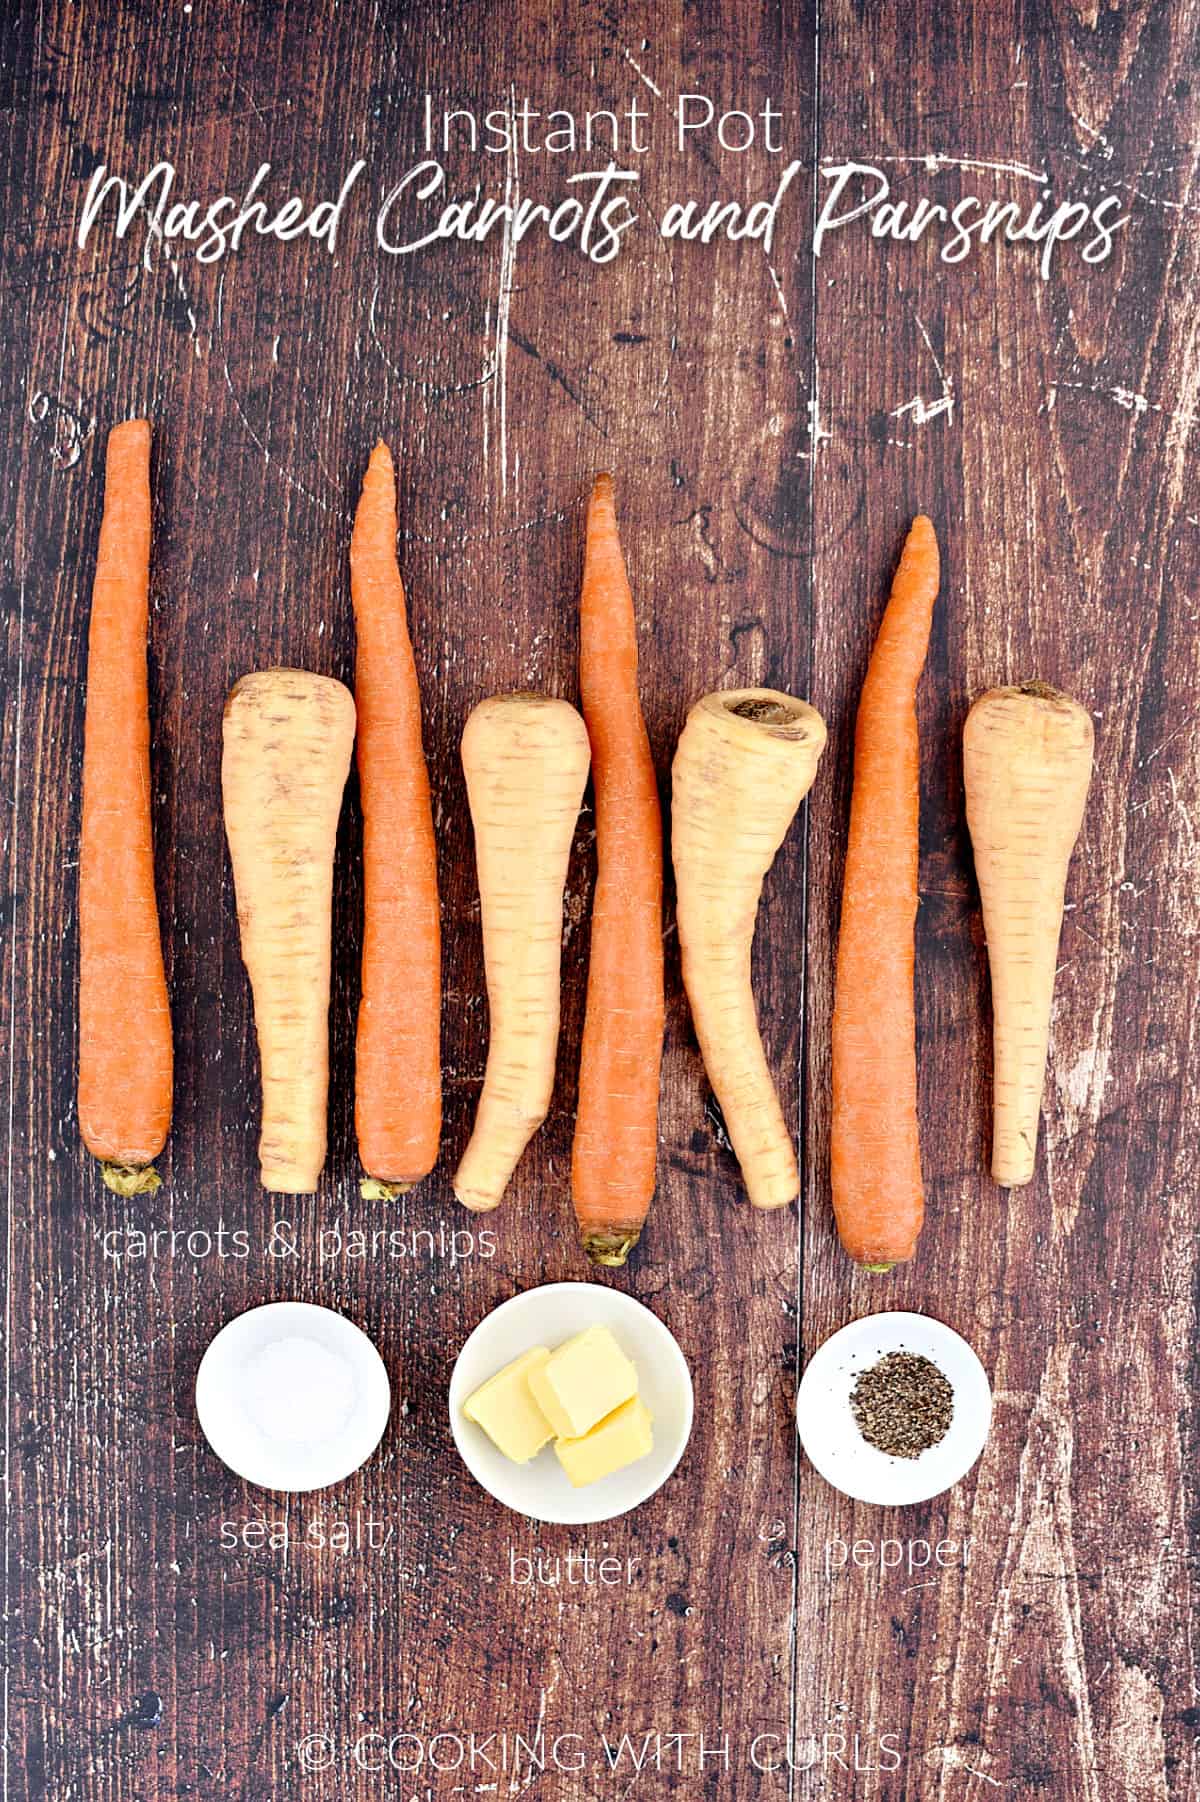 Four carrots, four parsnips, salt, butter pats and pepper in small white bowls. 